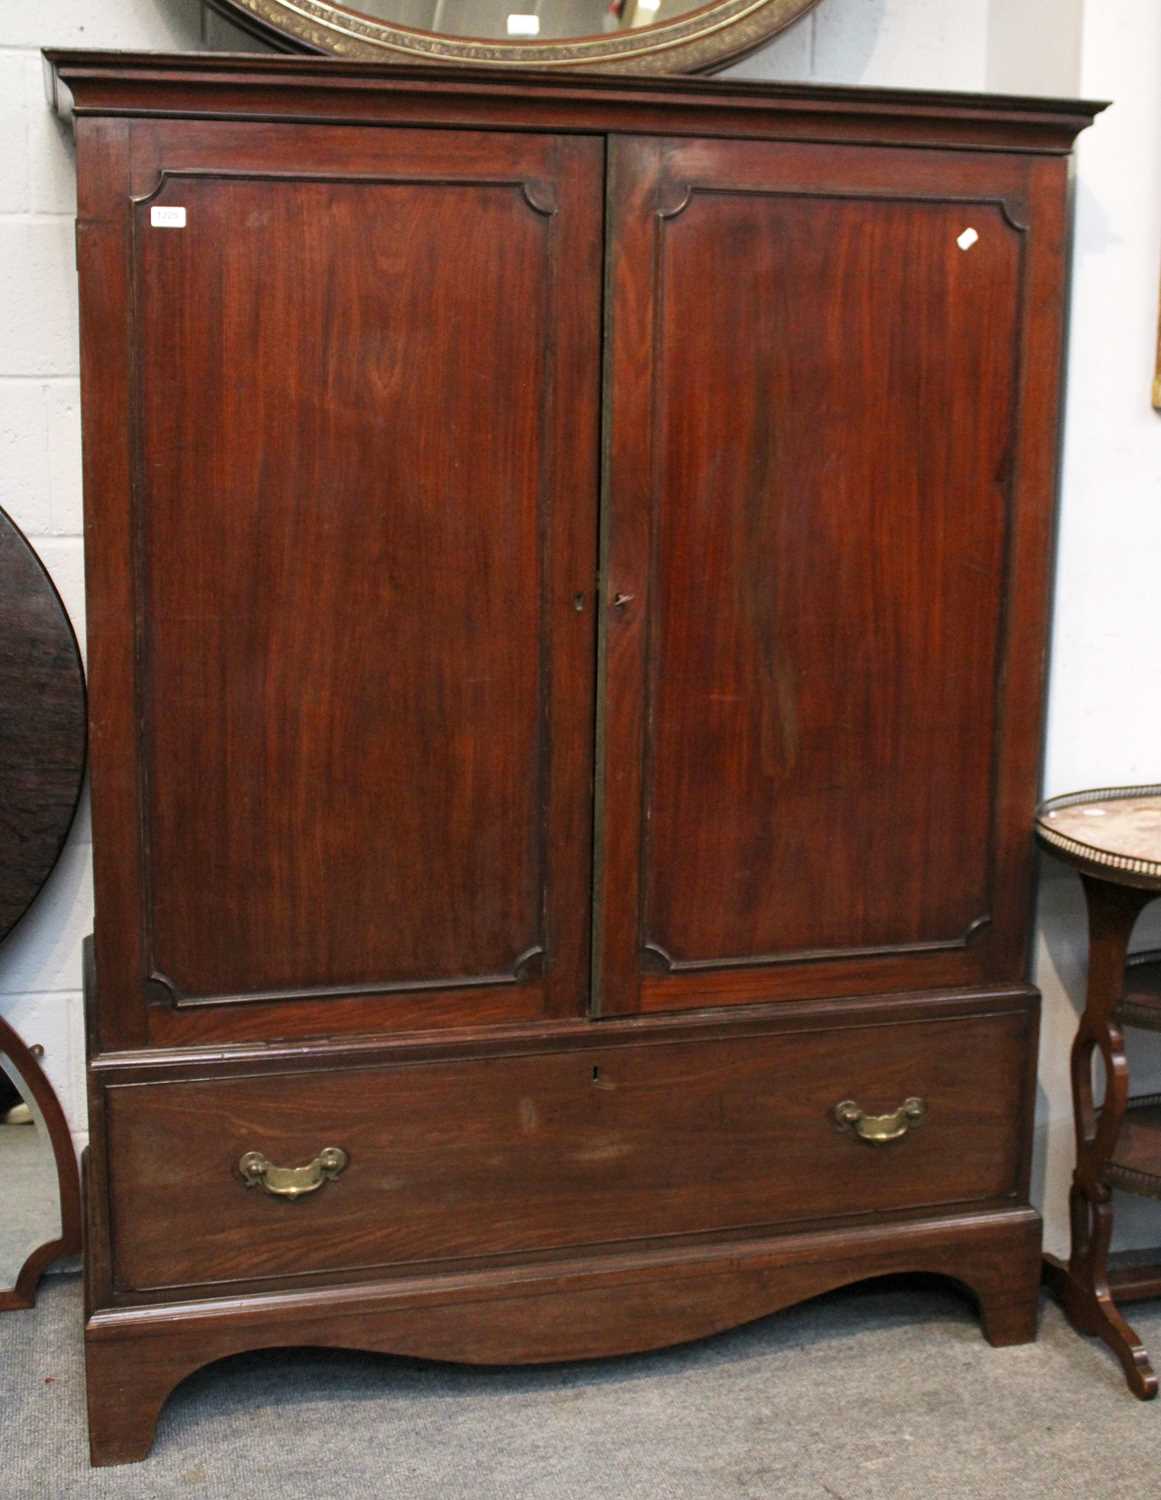 A 19th Century Mahogany Two Door Dwarf Wardrobe, 132cm by 53cm by 174cm; together with another two - Image 3 of 3